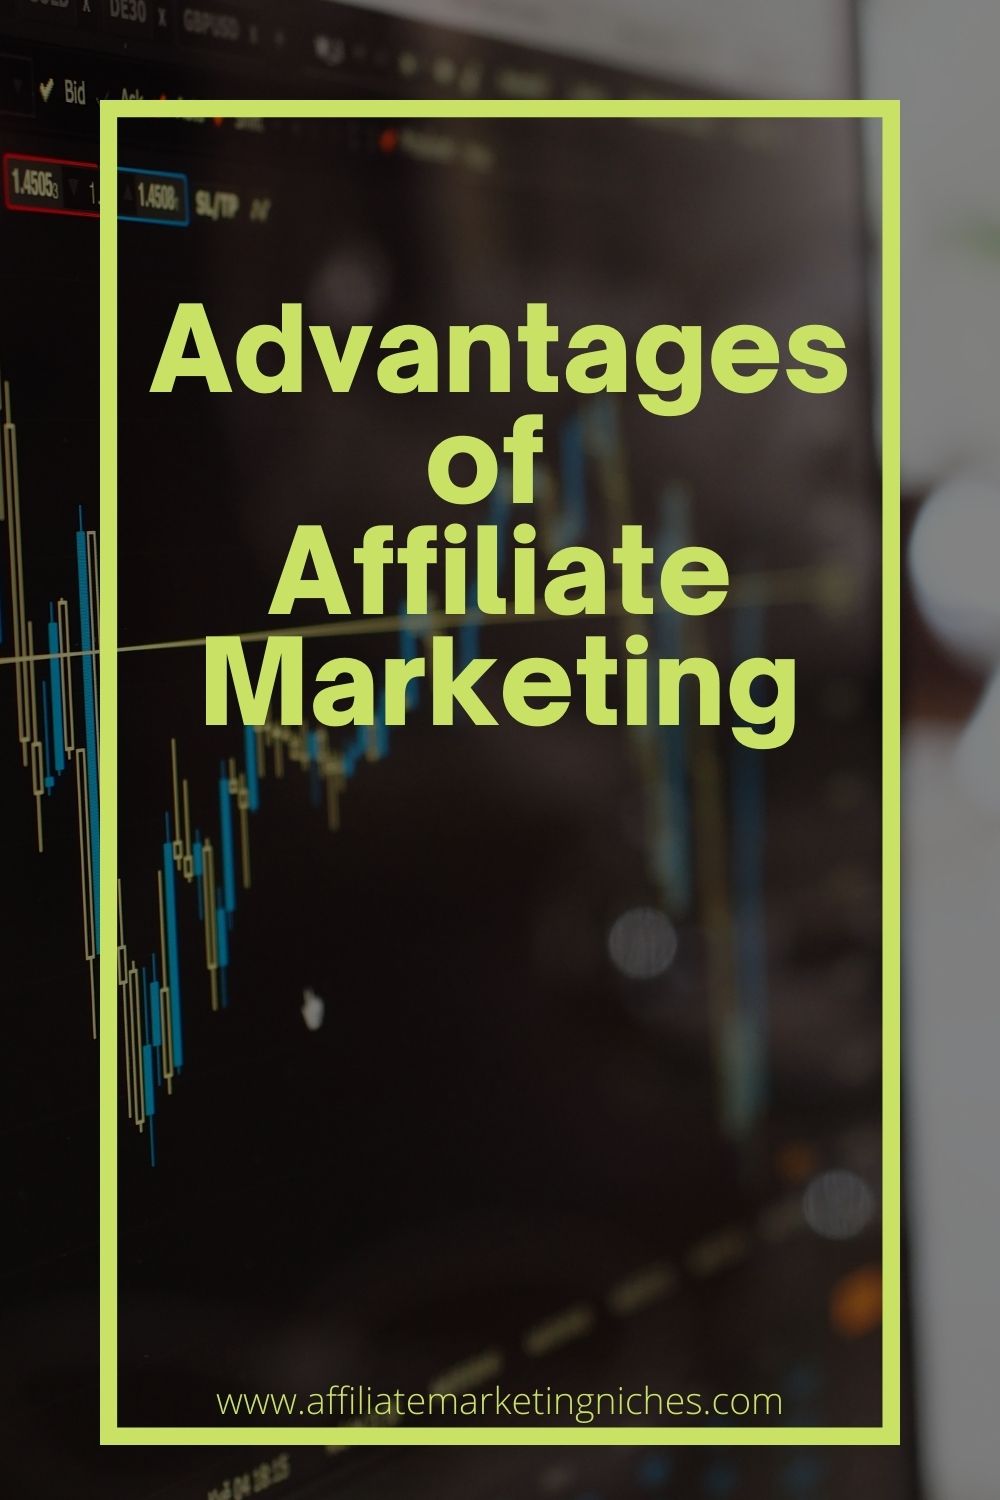 Why affiliate marketing has many advantages